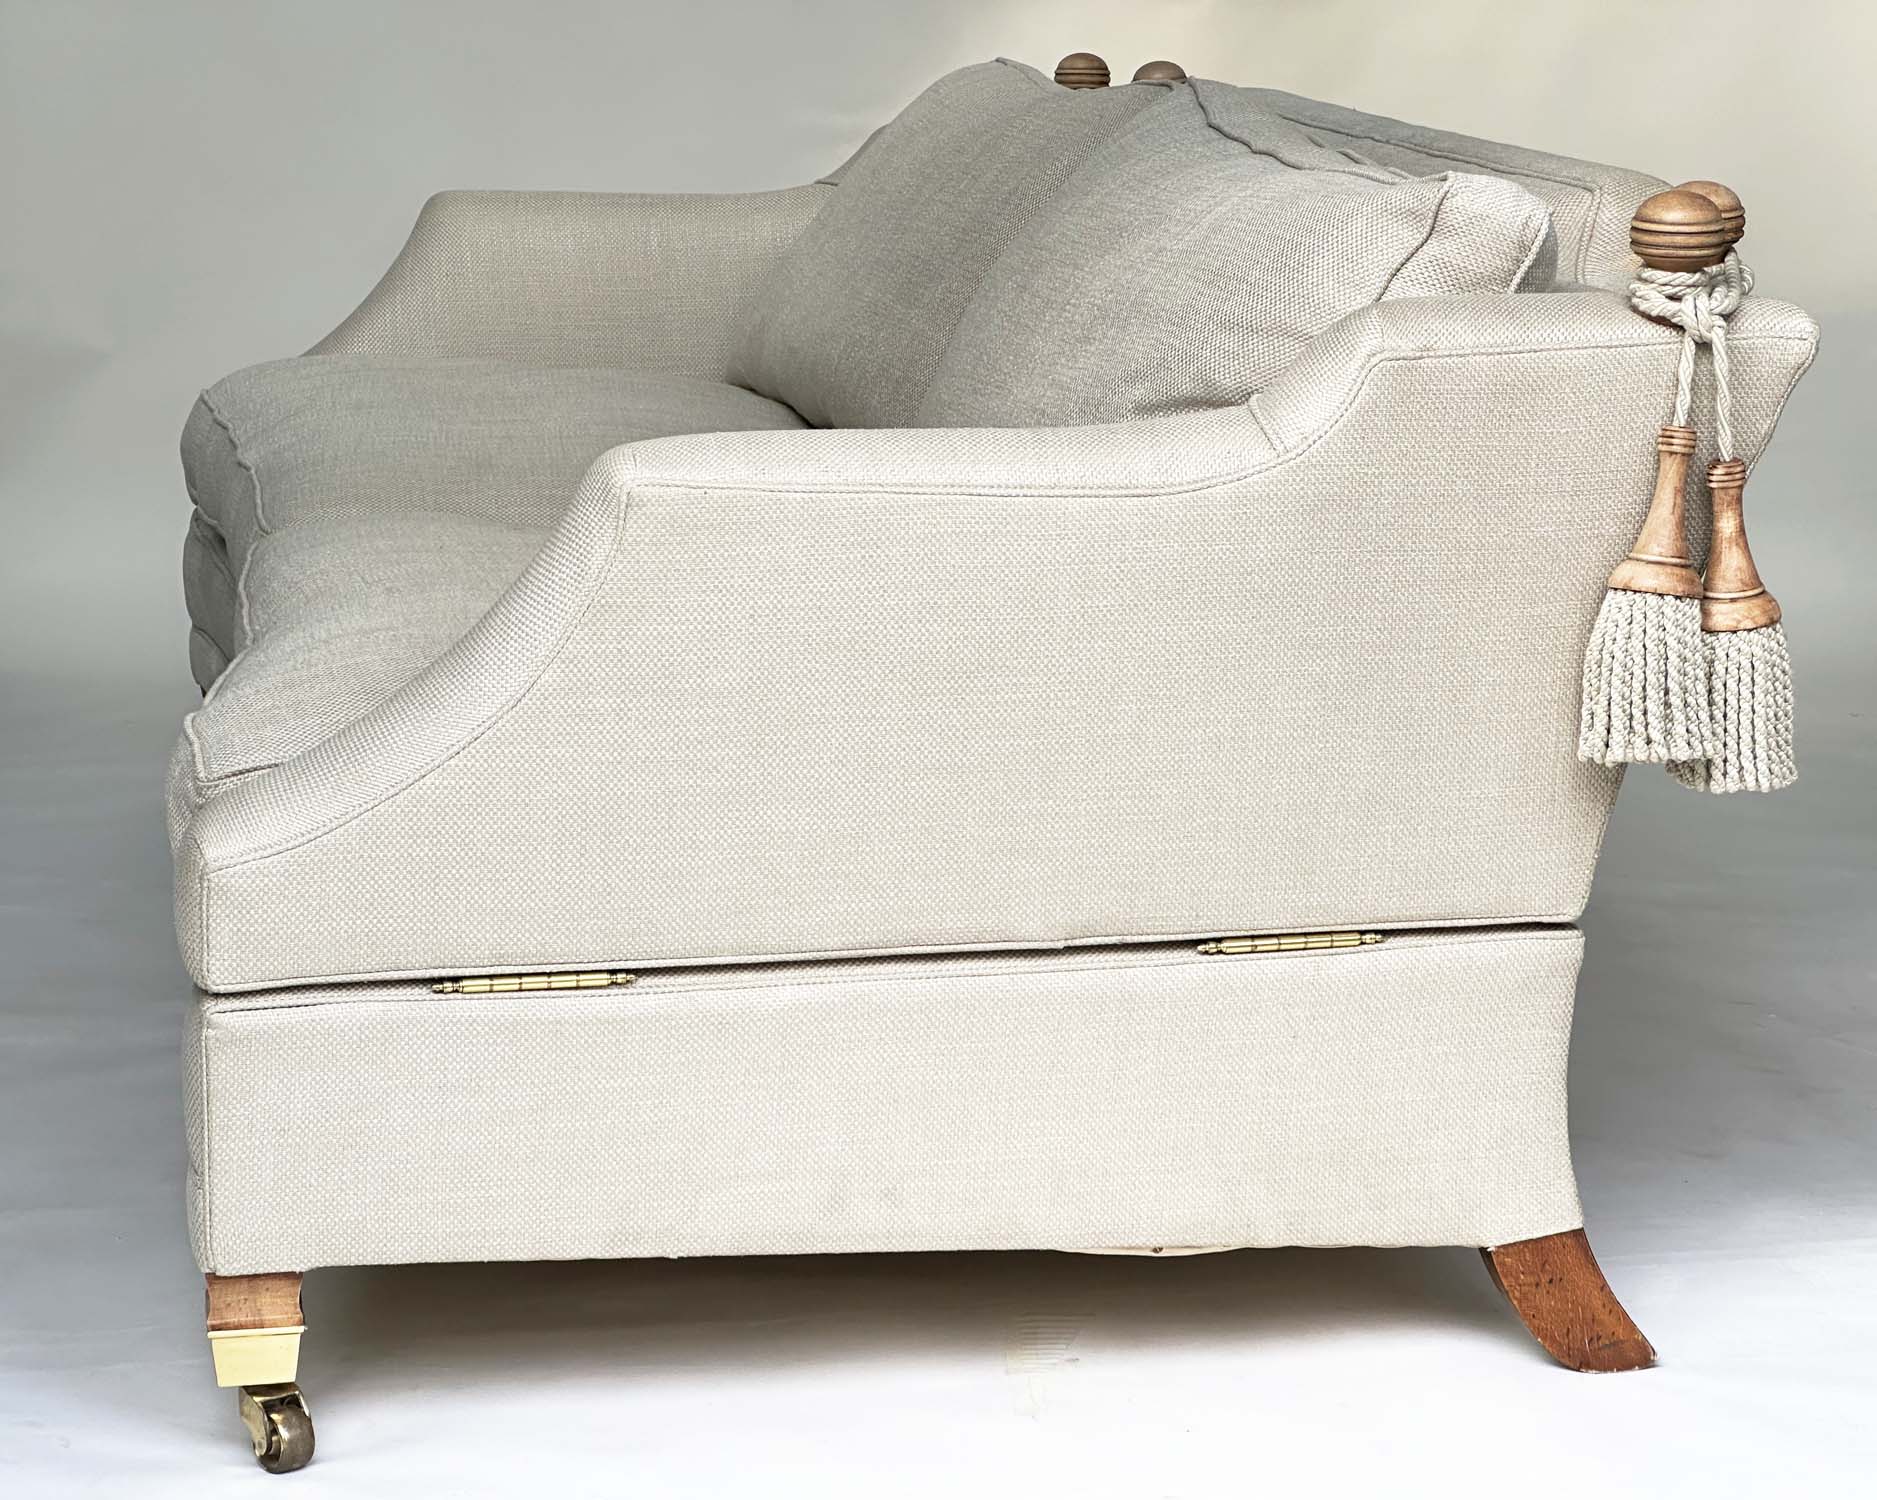 KNOLL SOFA BY DURESTA, grey linen upholstered with down swept arms, feather filled cushions and - Image 12 of 14